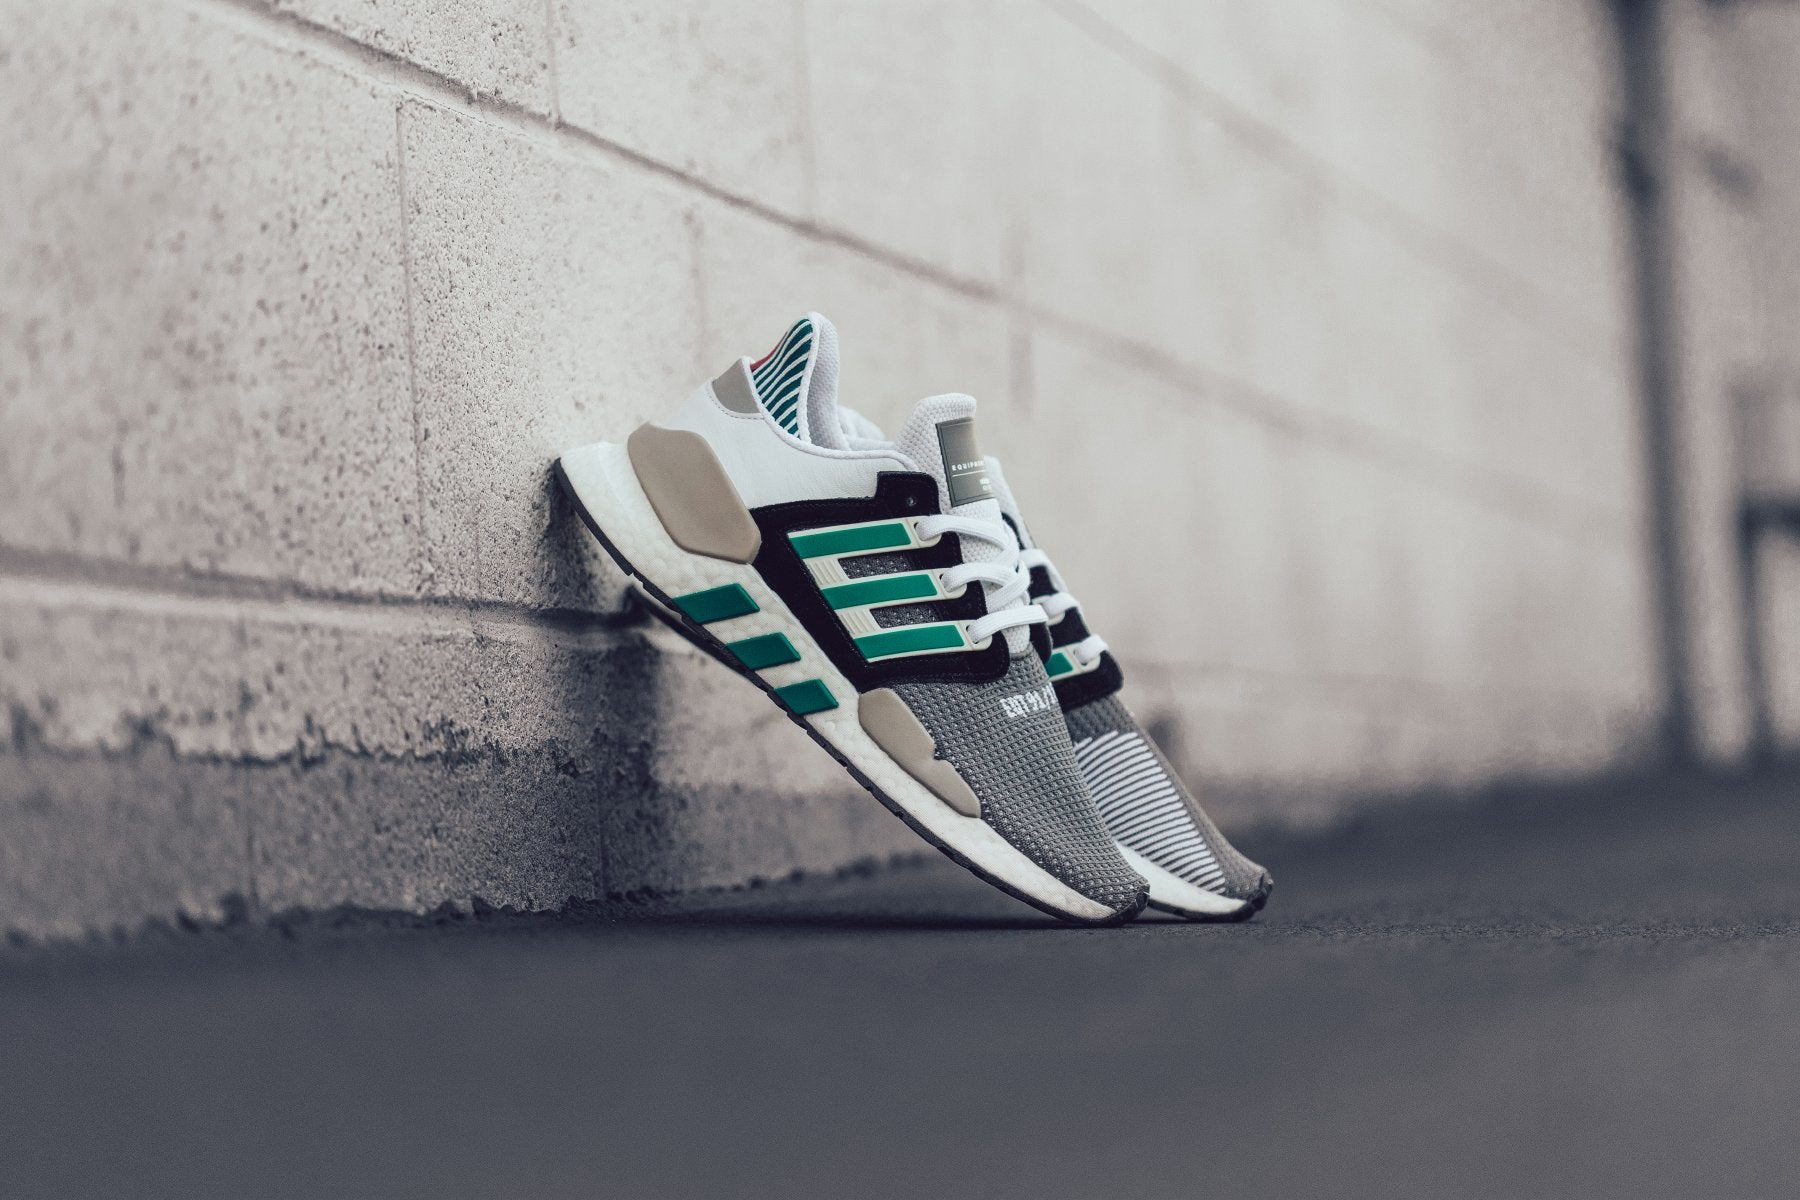 Adidas EQT Support "Black/Clear Grey" 発売中 – Feature